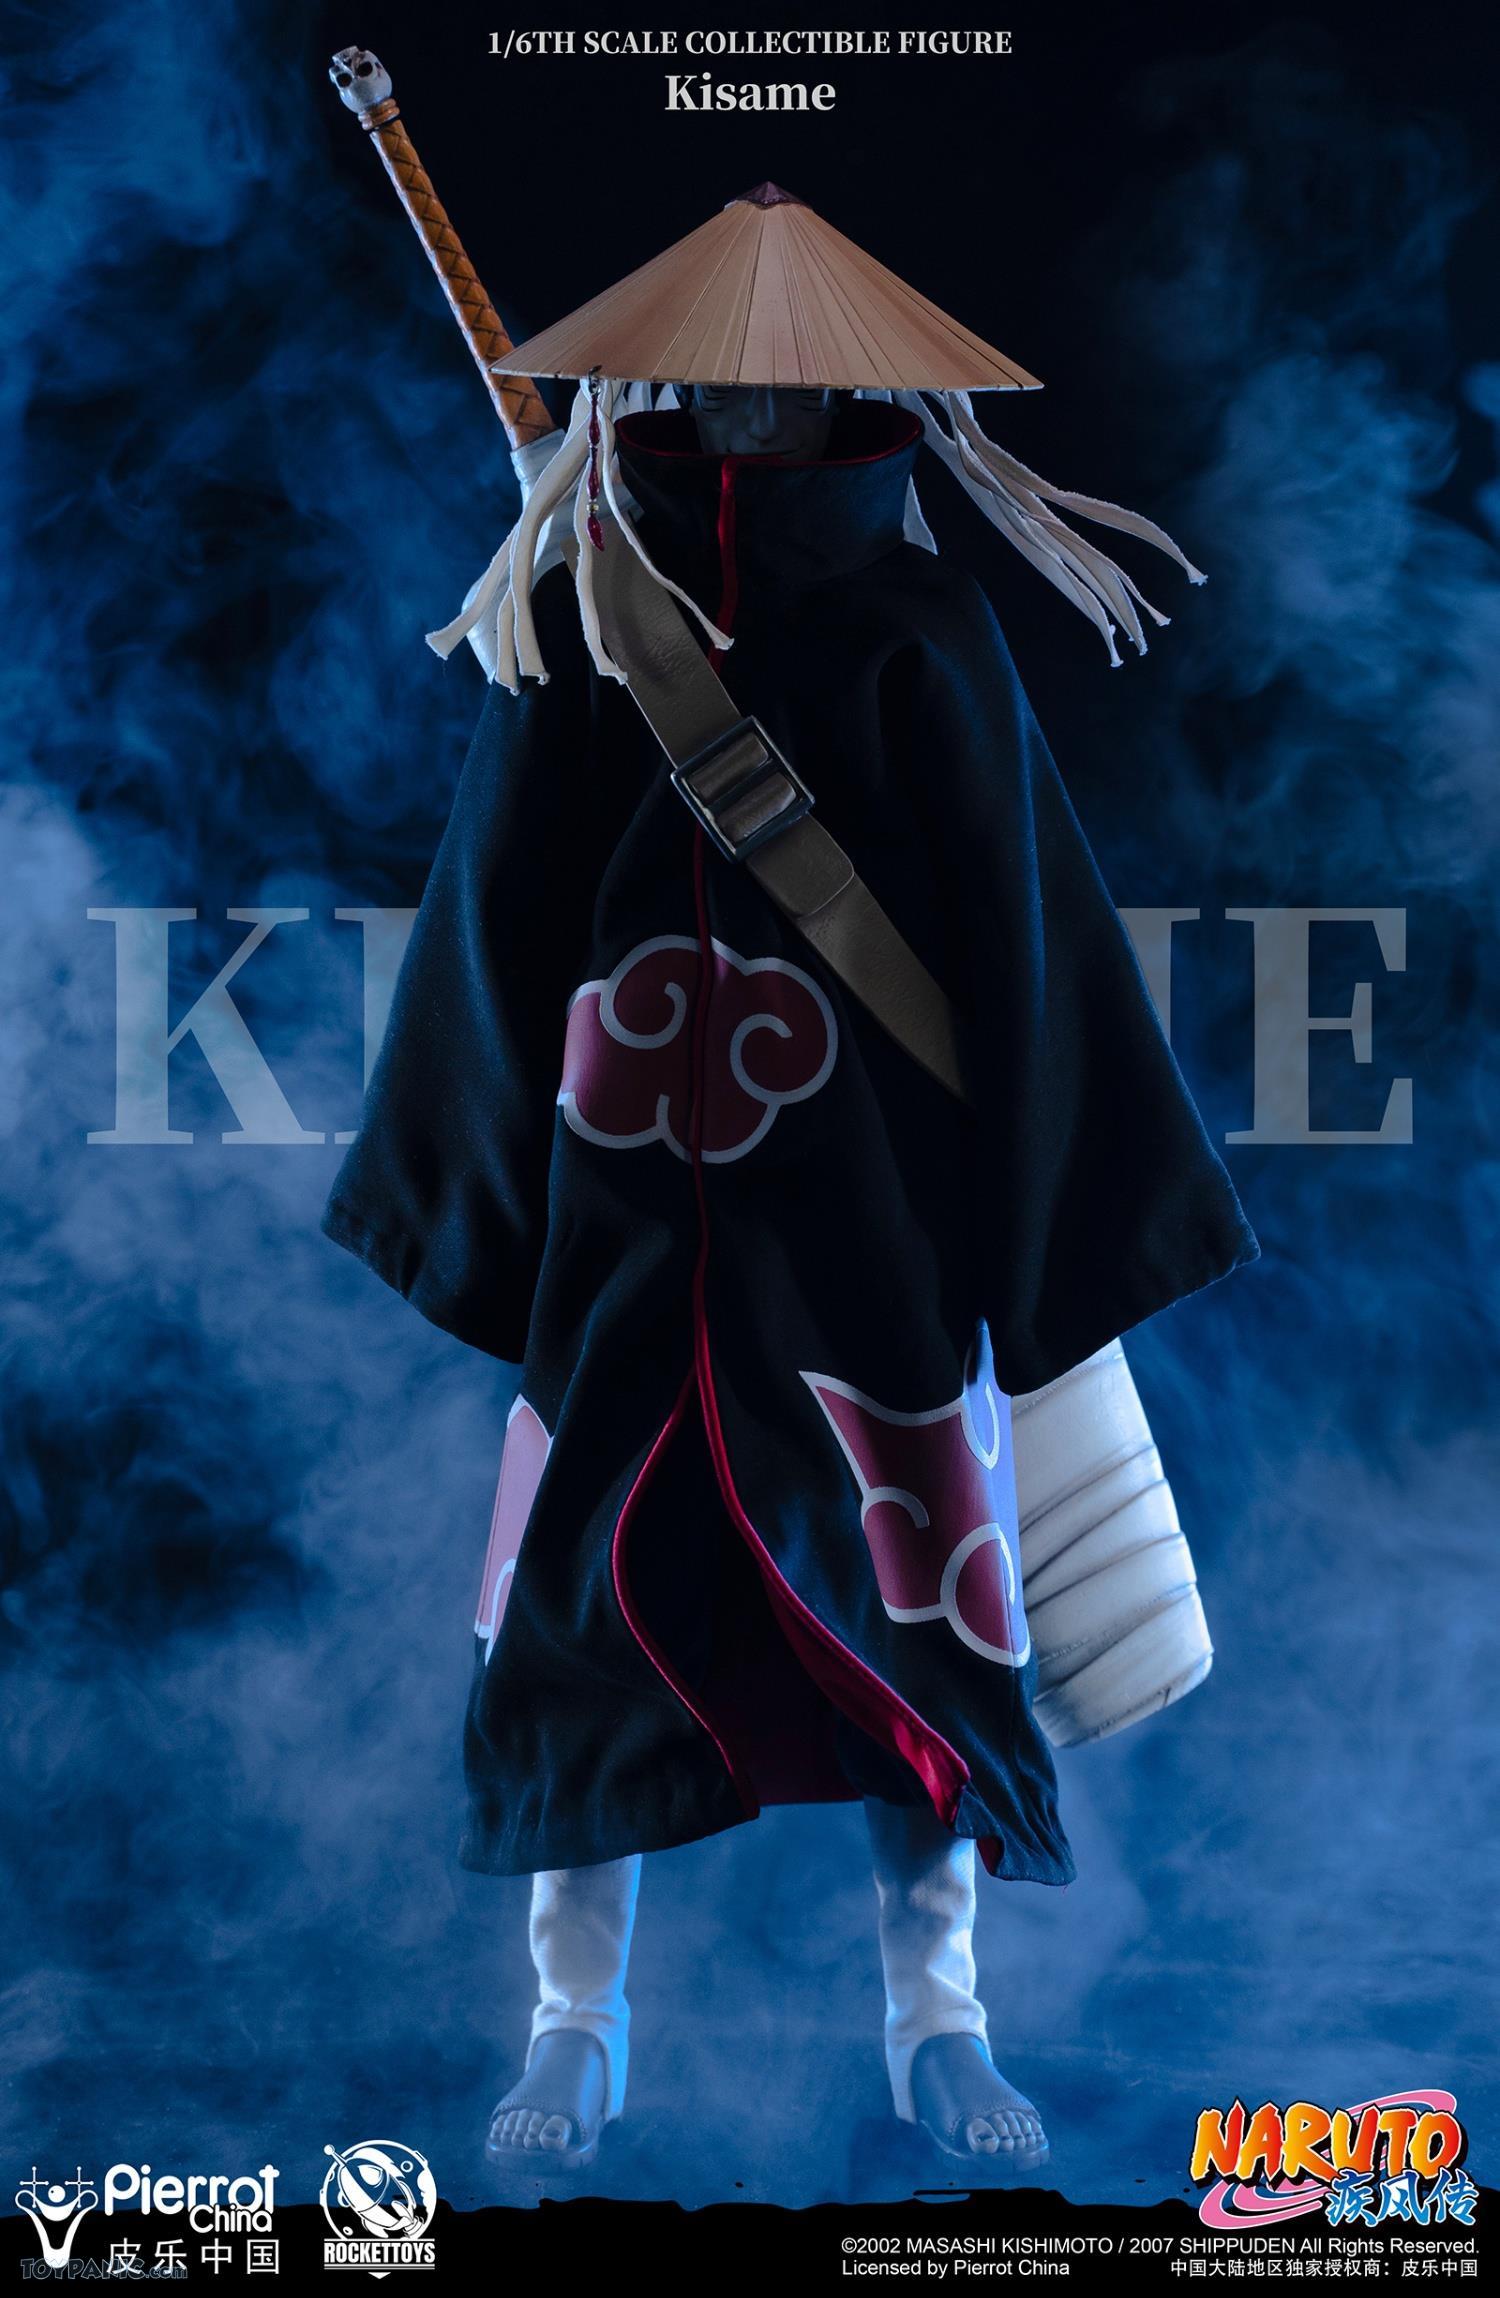 pierrot - NEW PRODUCT: Rocket Toys ROC-007 1/6 Scale Kisame 221202460438PM_9230500